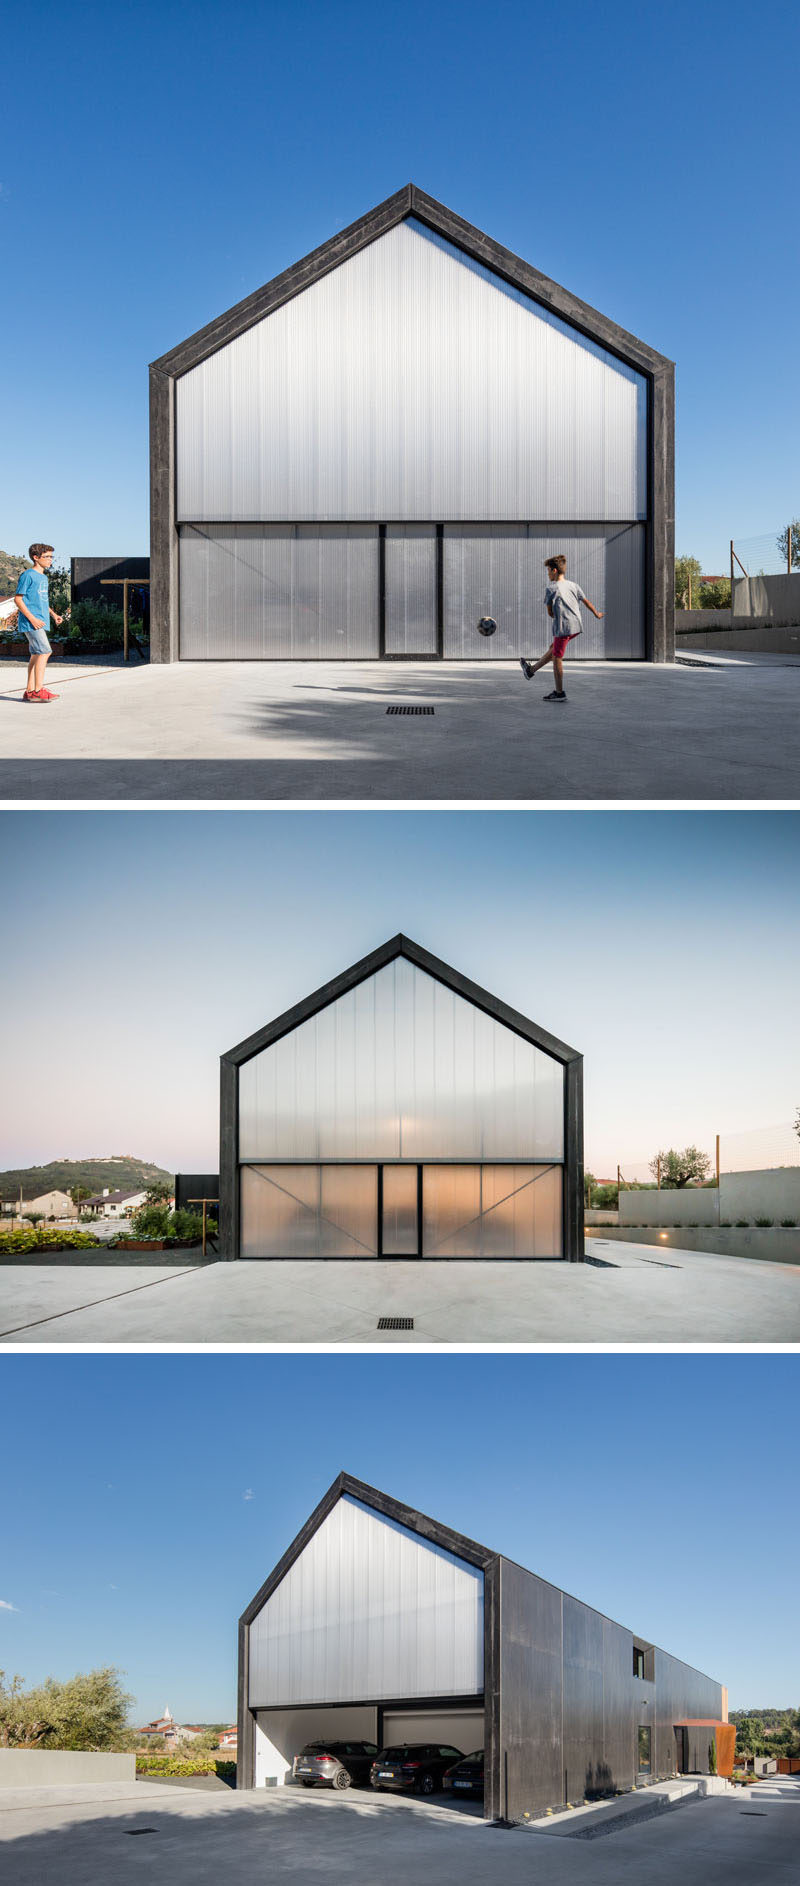 At the rear of this house, semi-transparent material finishes the house design, and when opened reveals the garage.